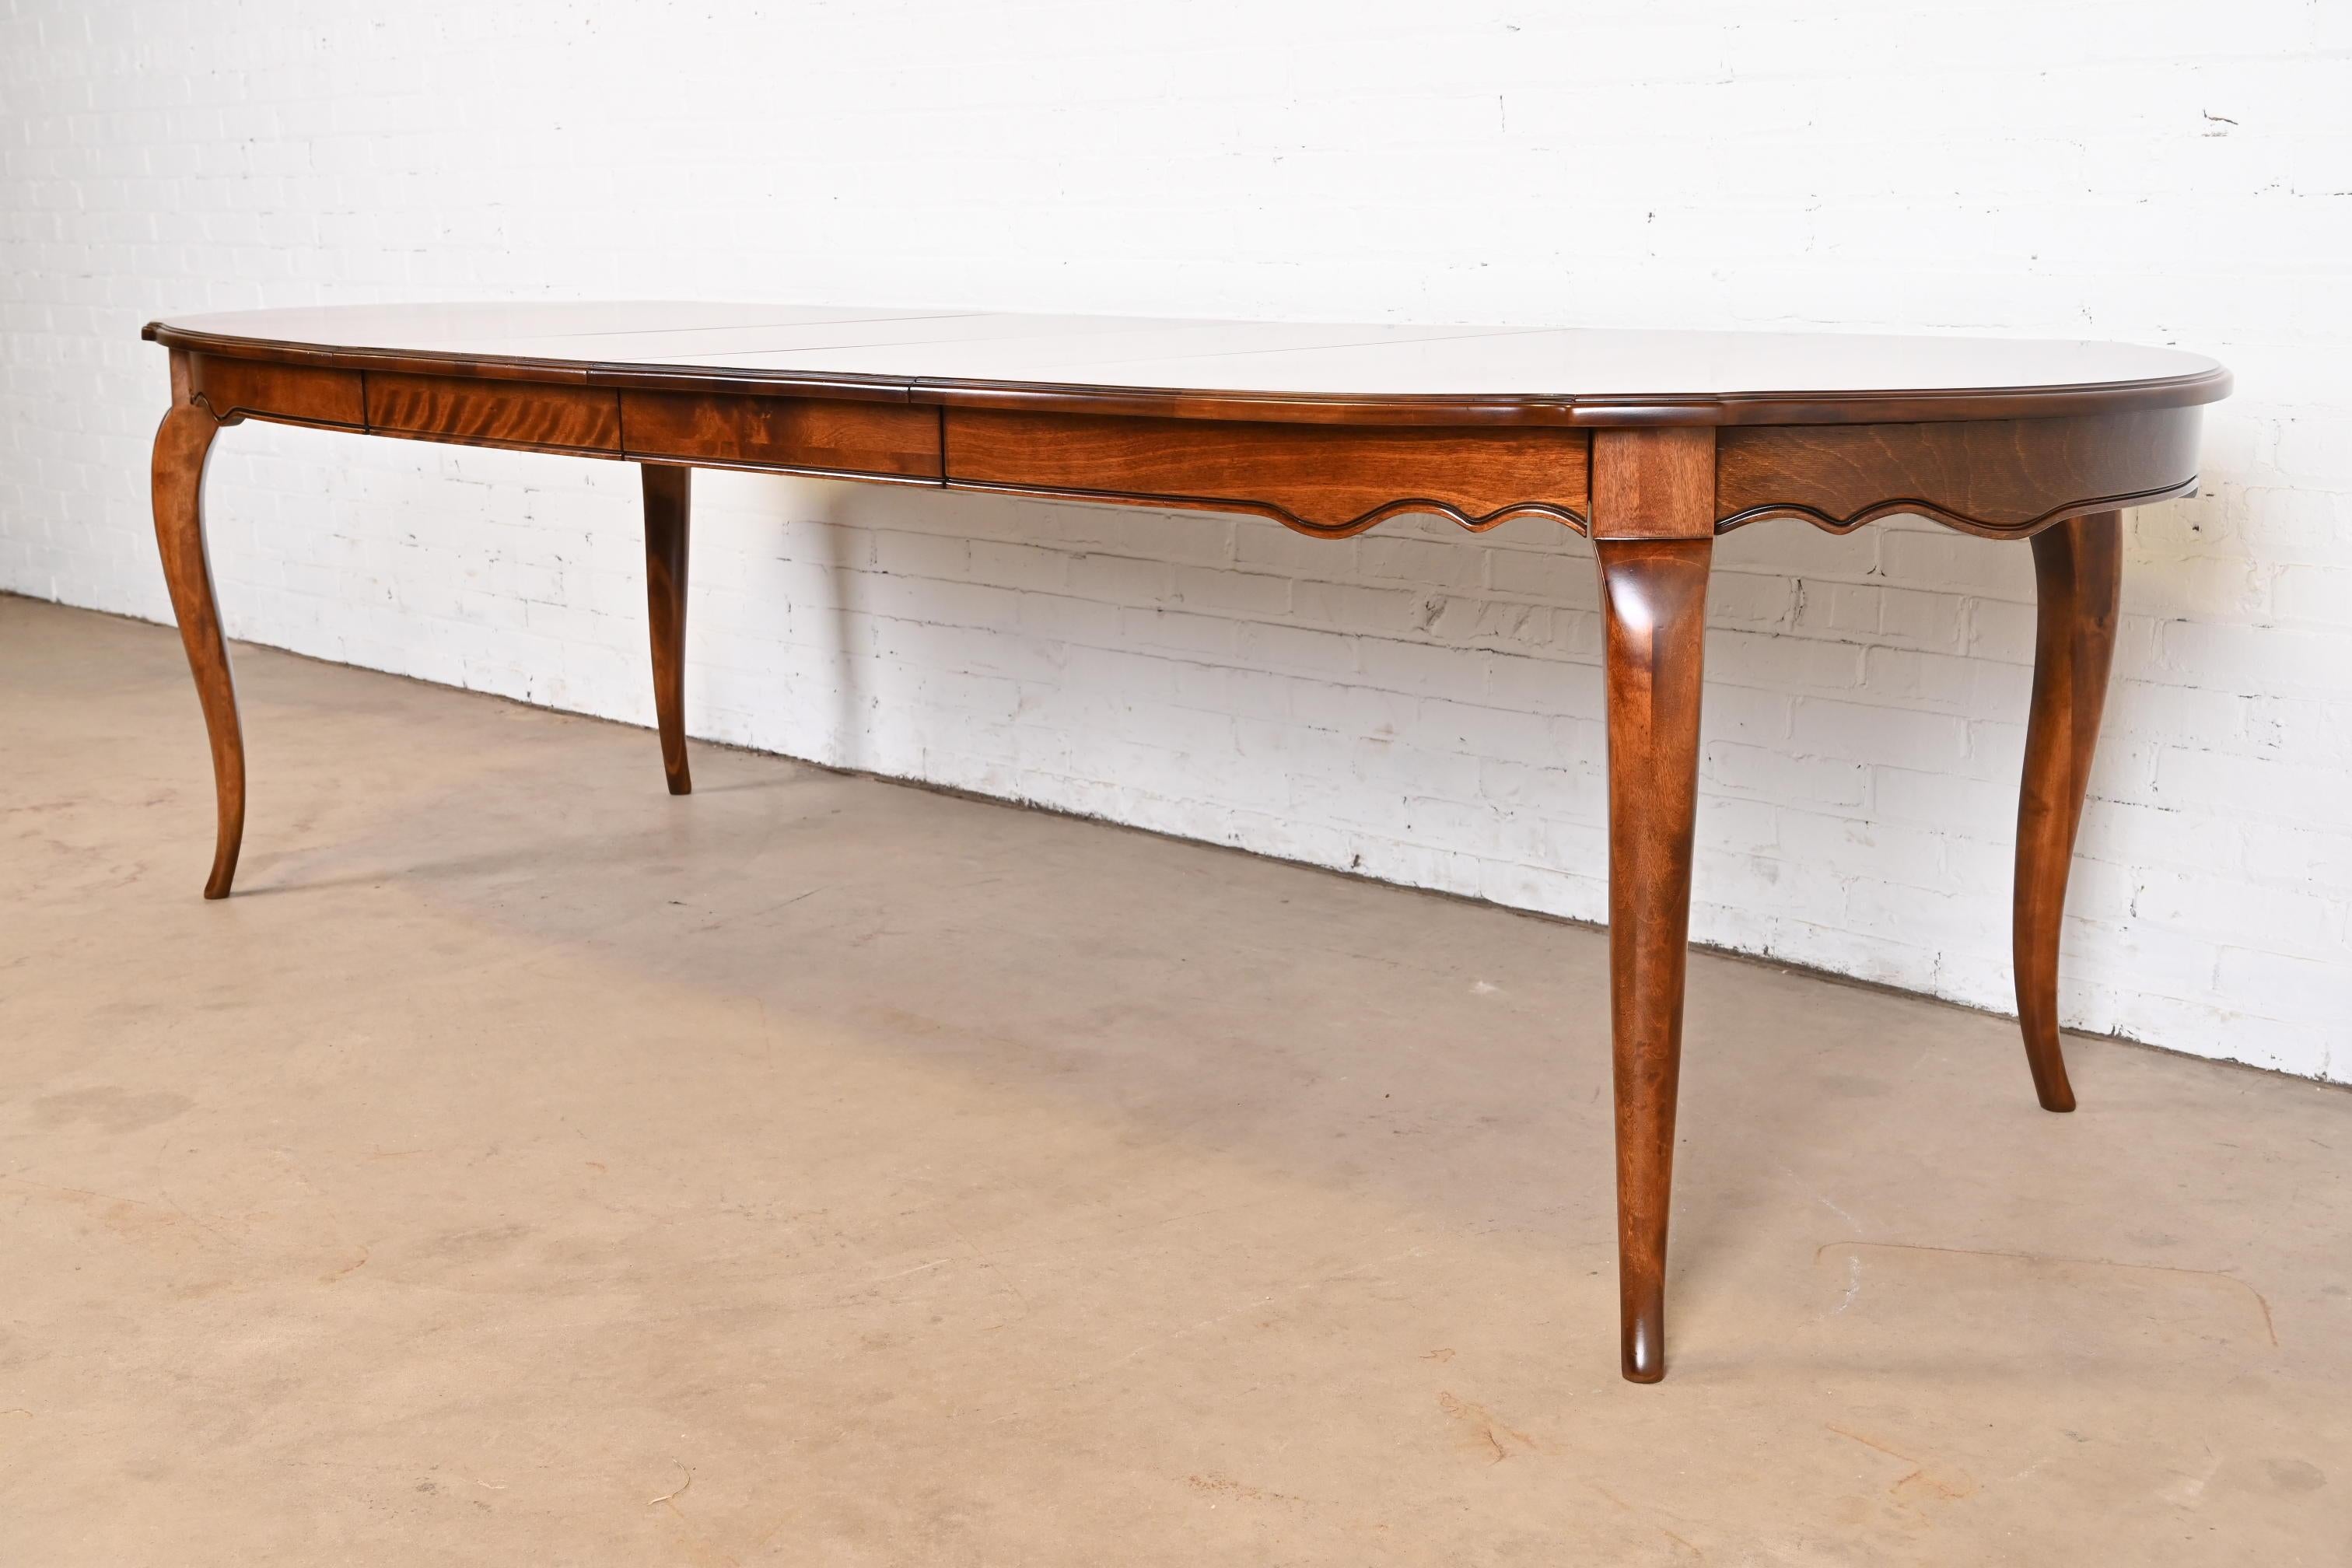 20th Century French Provincial Solid Birch Extension Dining Table, Newly Refinished For Sale